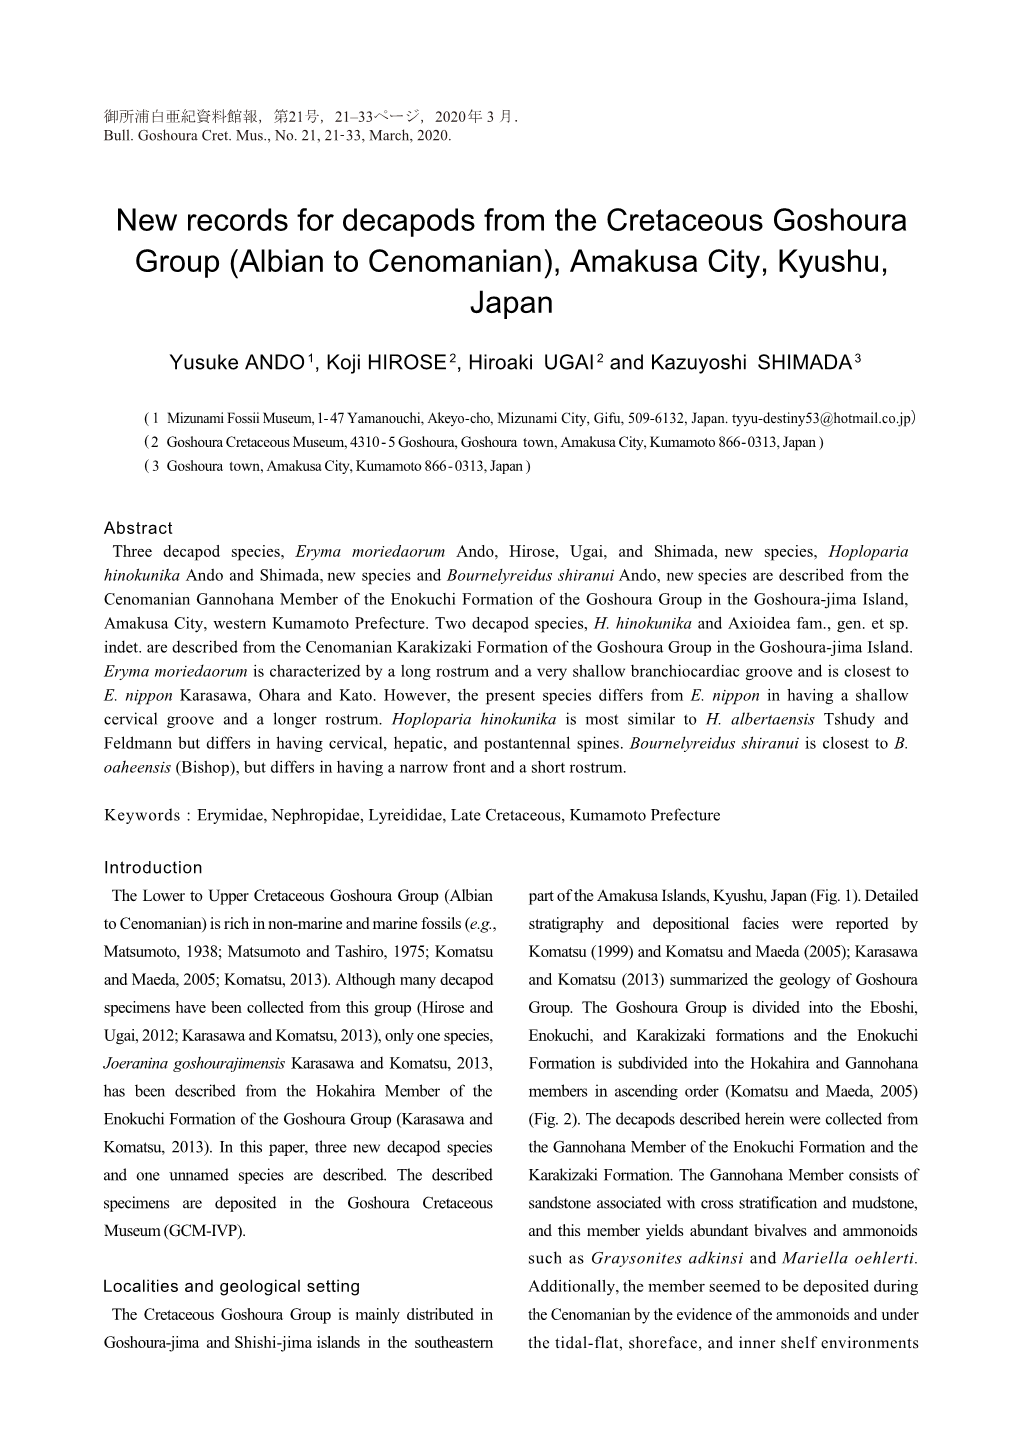 New Records for Decapods from the Cretaceous Goshoura Group (Albian to Cenomanian), Amakusa City, Kyushu, Japan